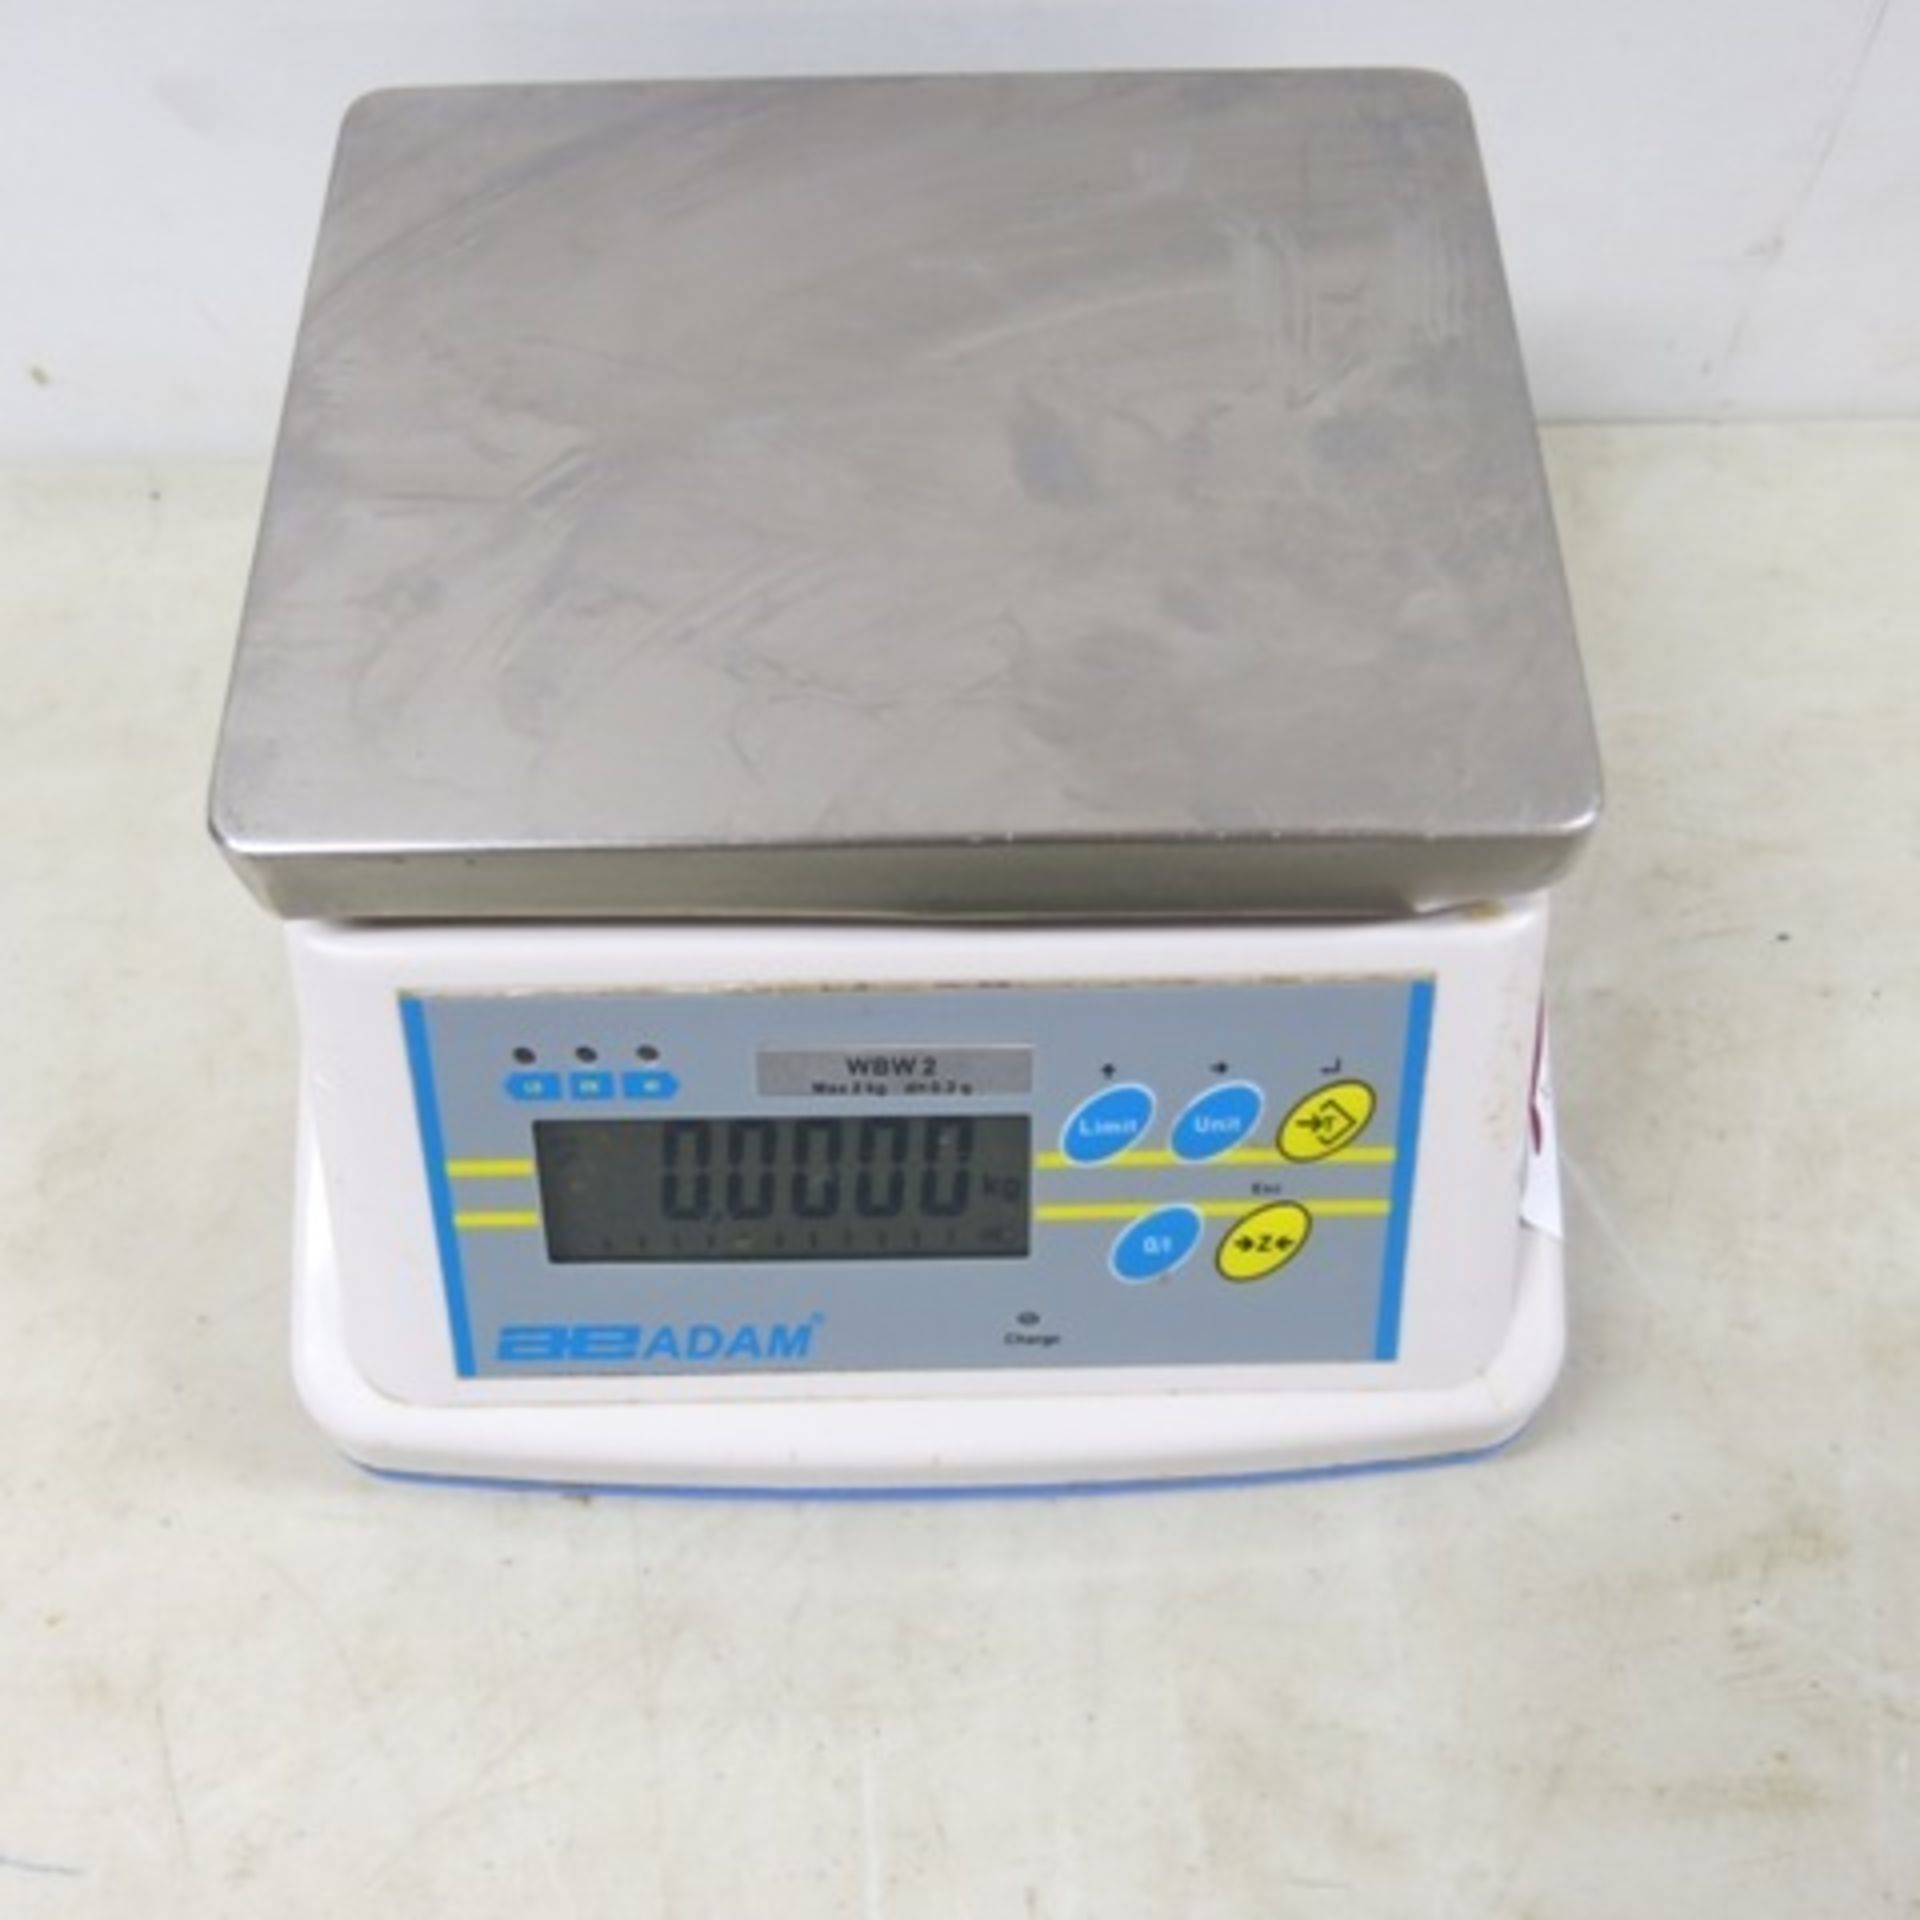 Adam WBW 2 Retail Scales Up to 2kg Capacity. - Image 4 of 4